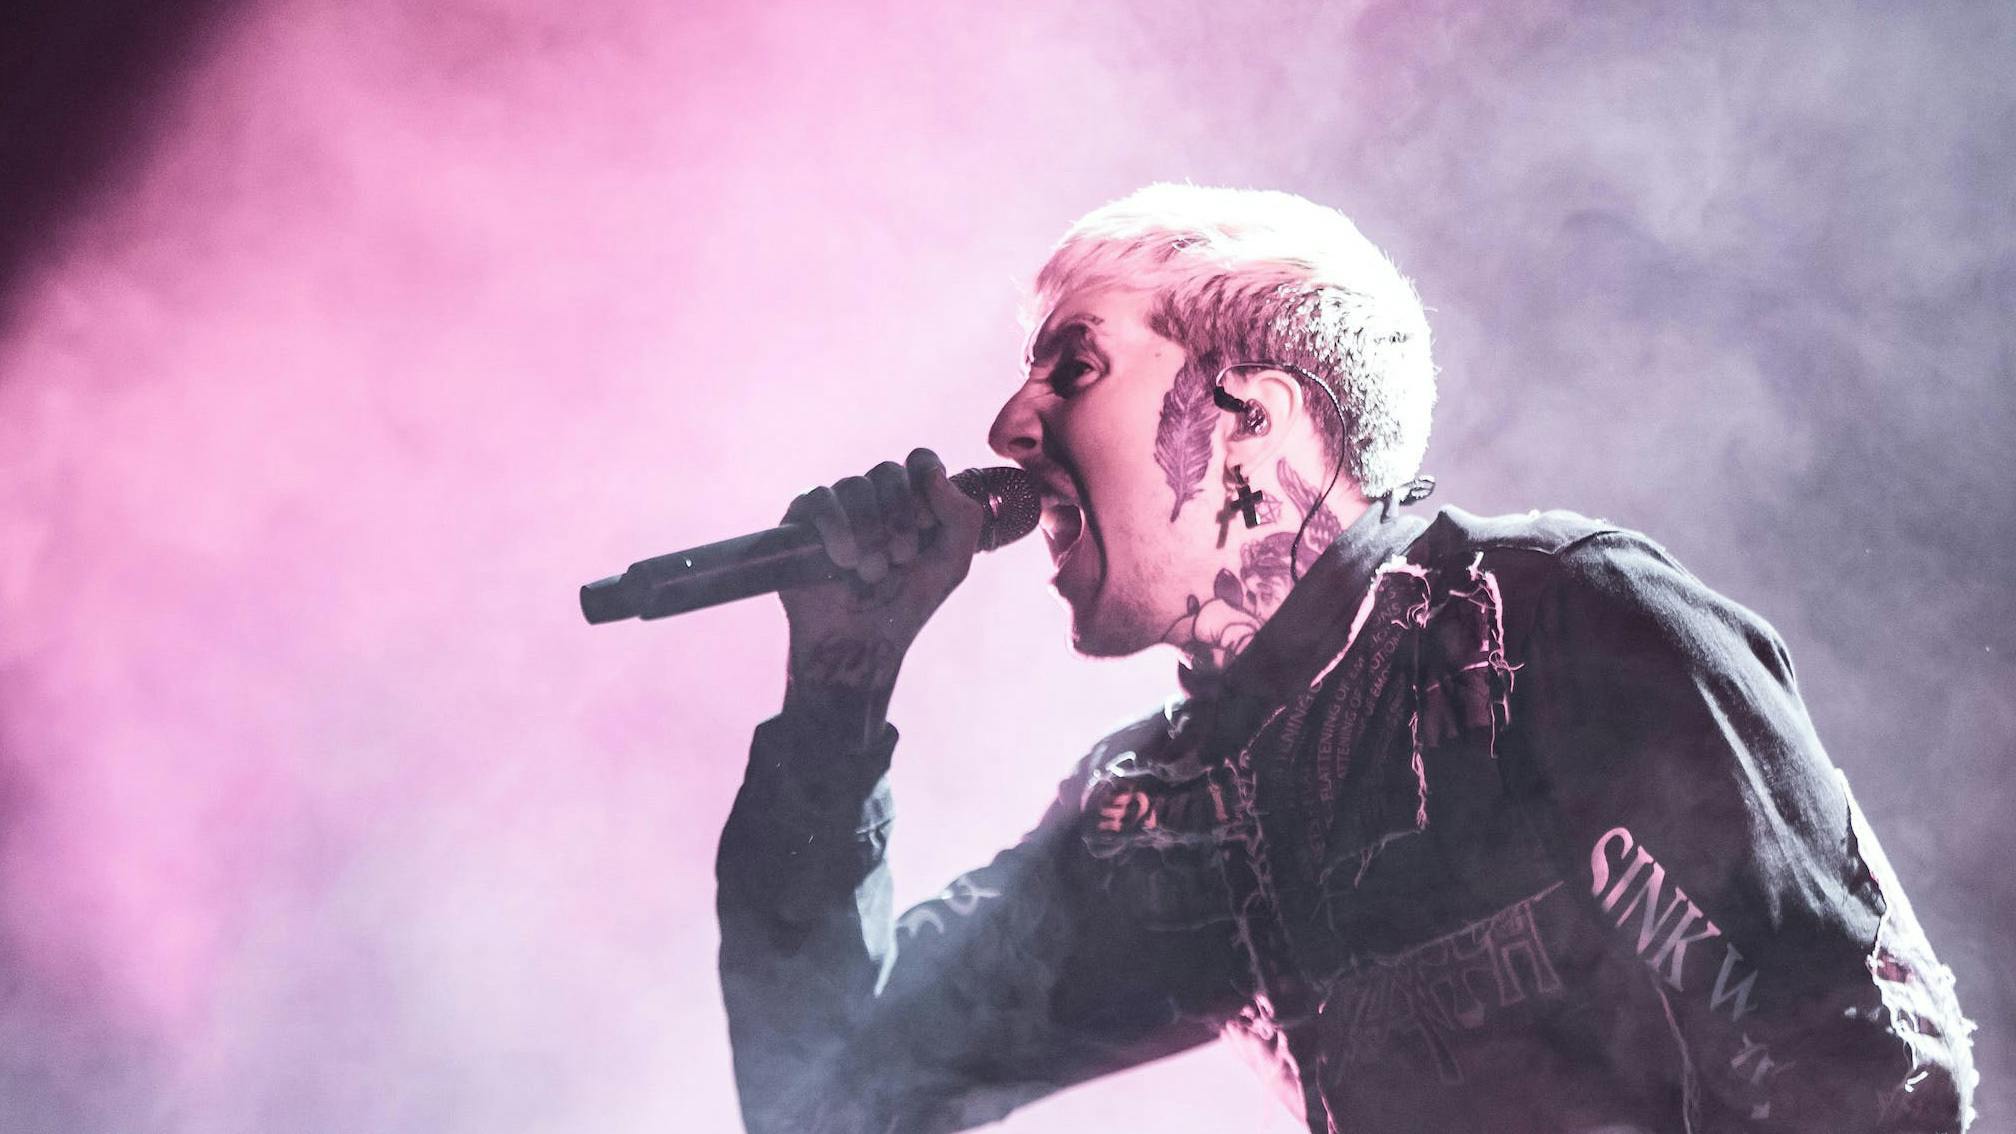 Here's the setlist from Bring Me The Horizon's Post Human tour